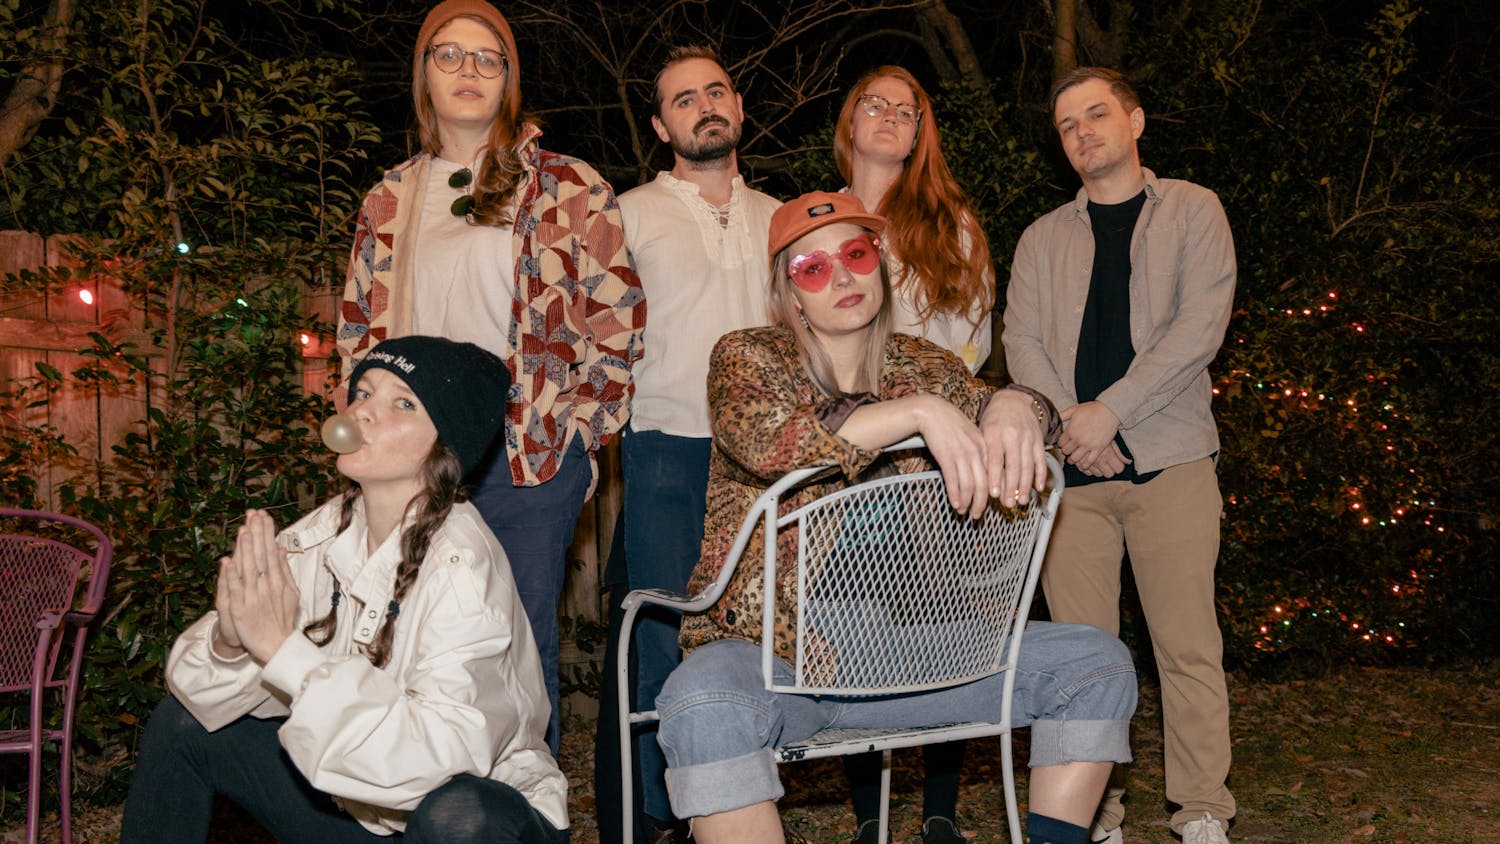 The Charlie Boy band poses for a group photo on Jan. 26, 2022. Top row, left to right: Emily McCollum (Drummer), Gabe Crawford (Guitar), Lanier S. (Bass) and Tyler Gordon (Guitar). Bottom row, left to right: Catherine Hunsinger (Cello) and Kat Hammond (Lead/ Guitar).&nbsp;